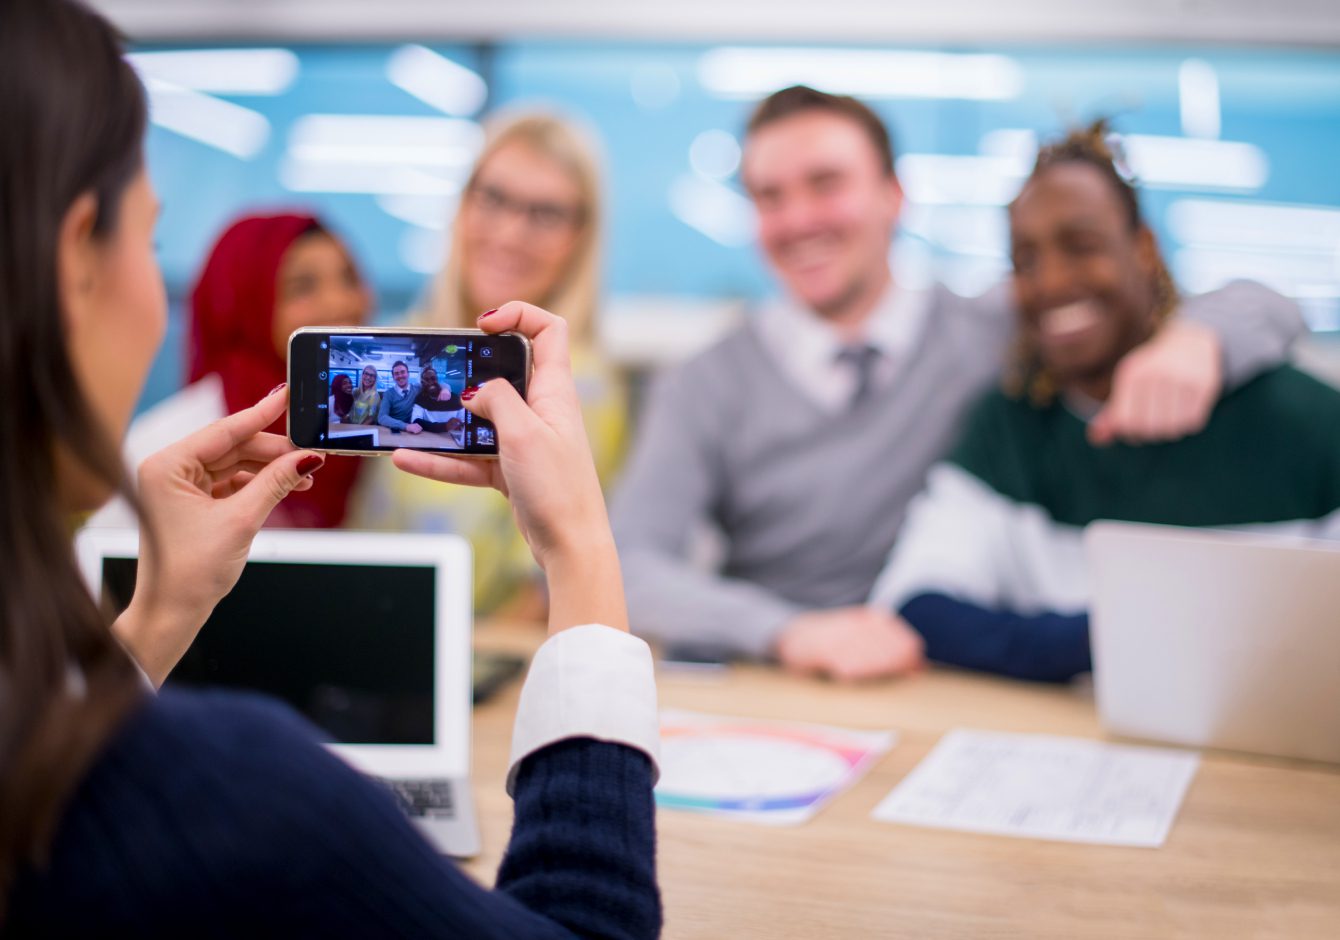 Woman using smartphone to take photo of team members in office